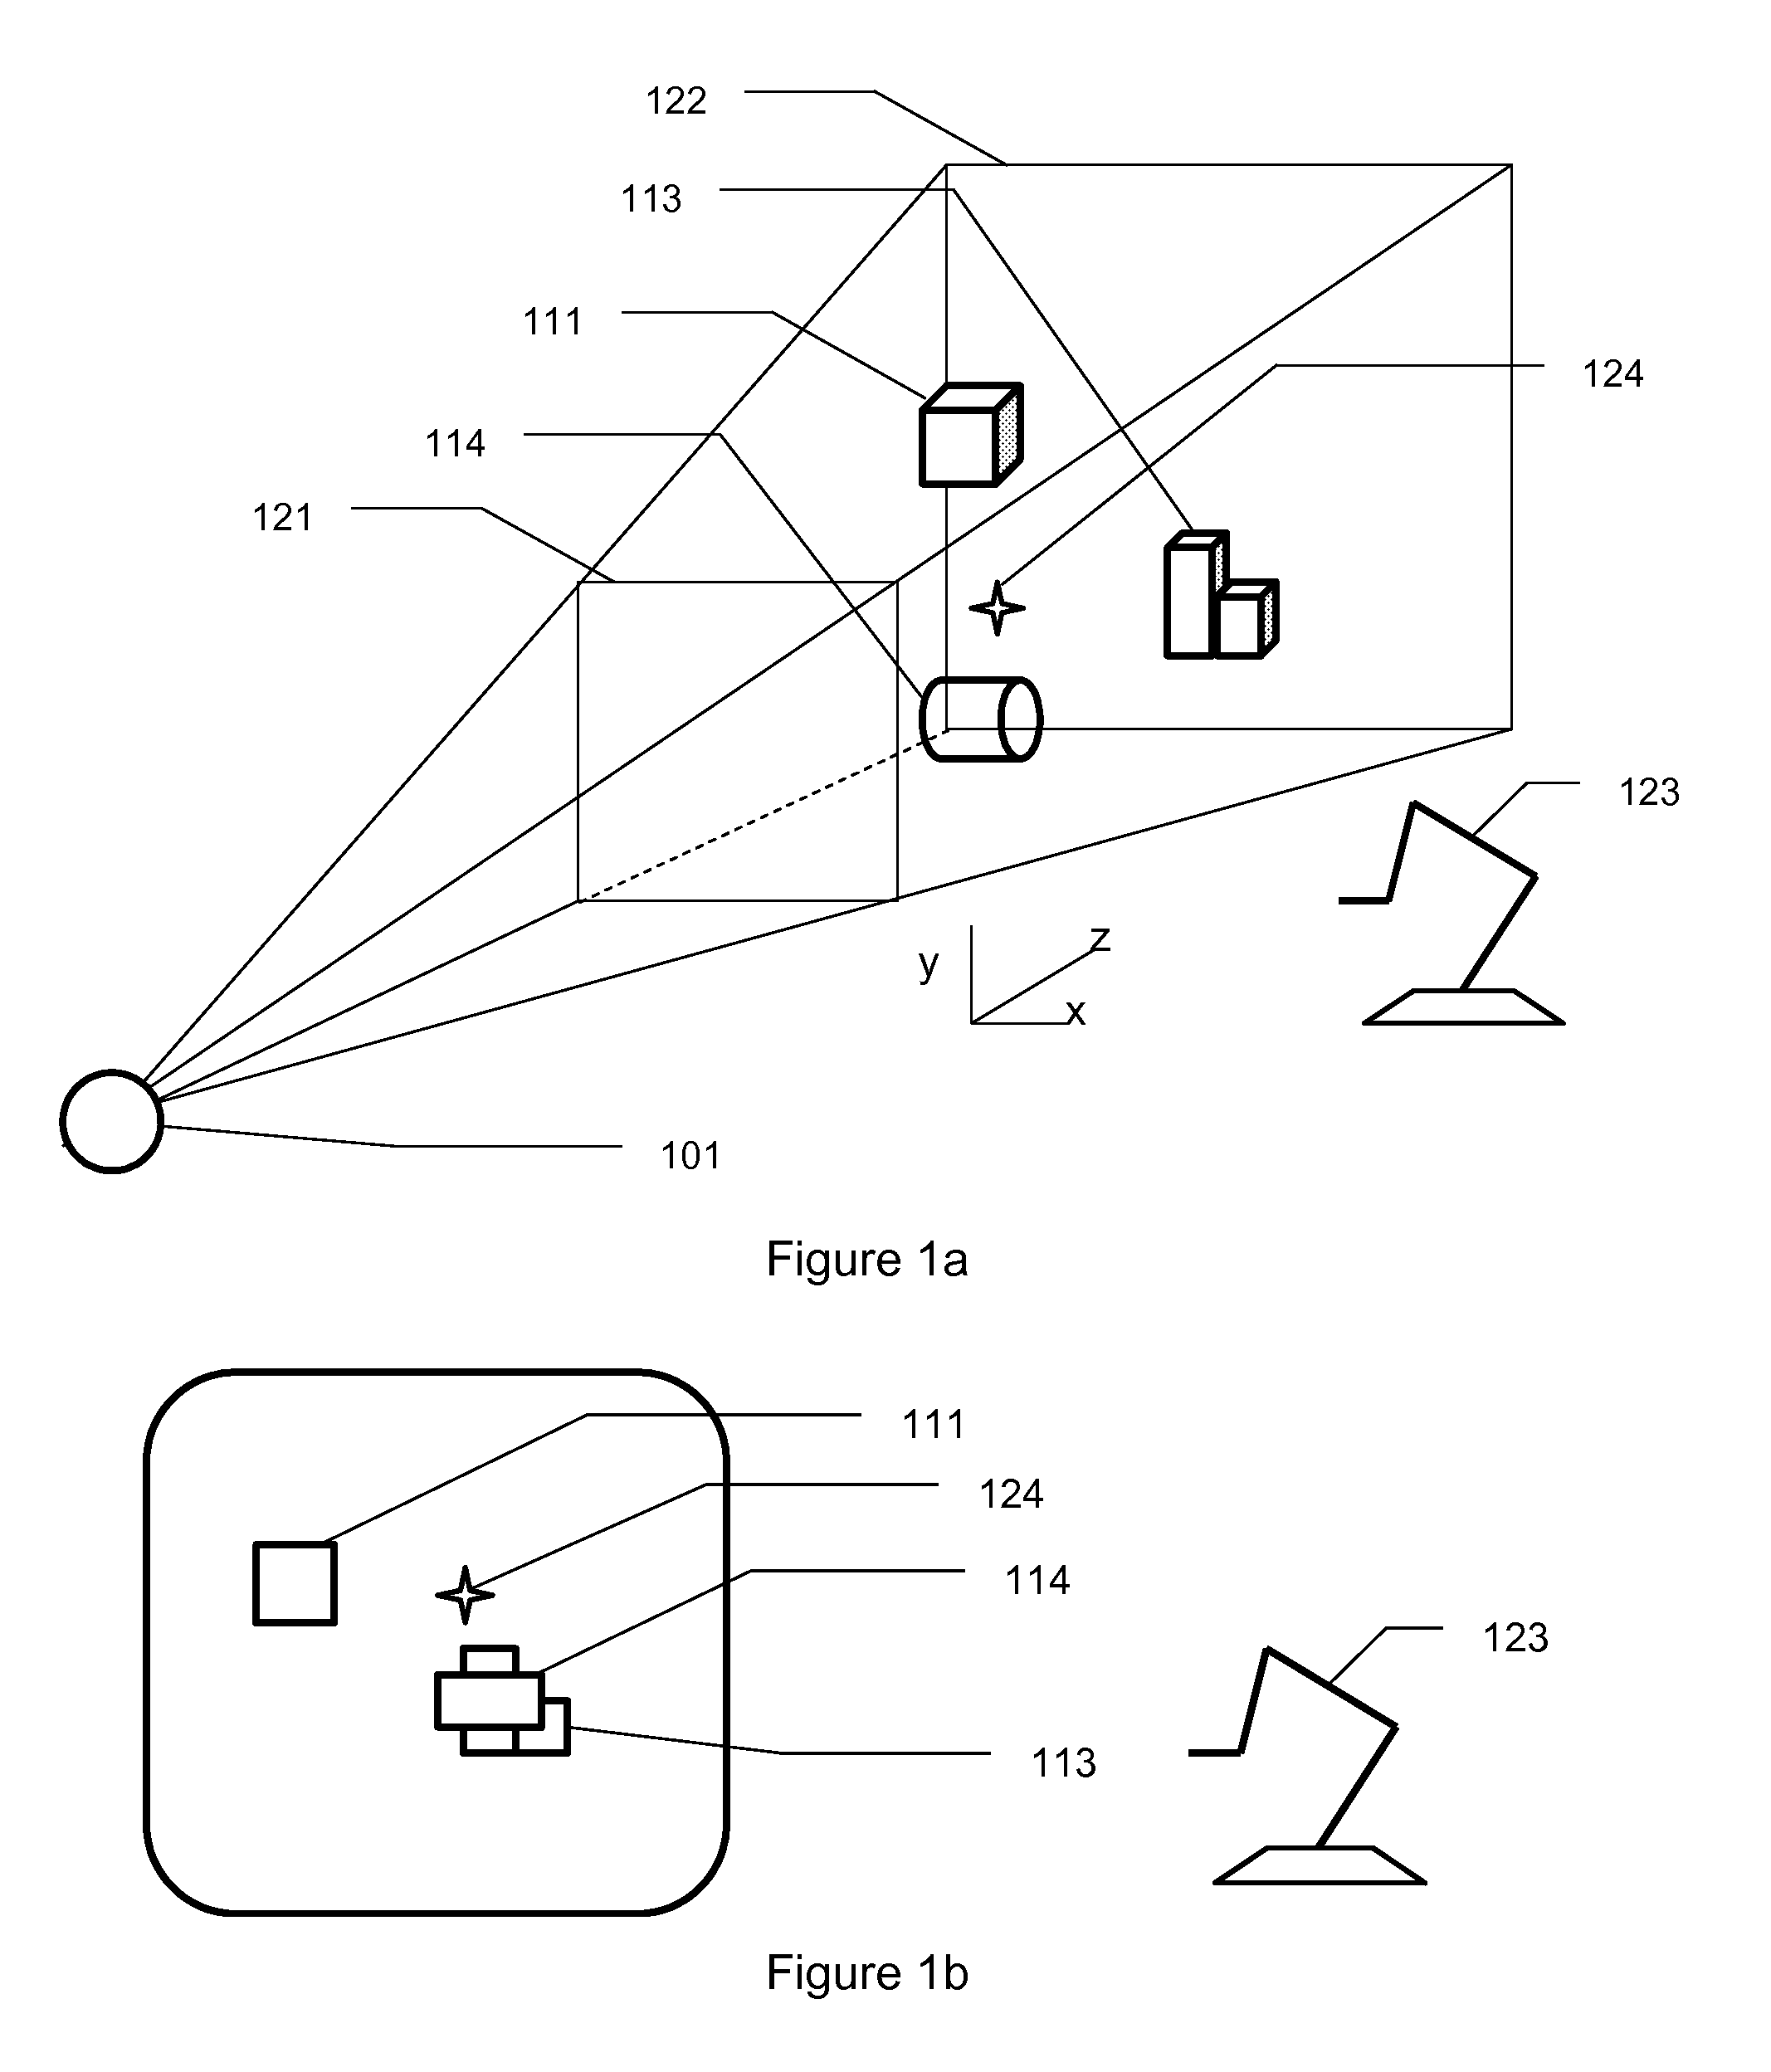 Human-Computer Interface Including Efficient Three-Dimensional Controls